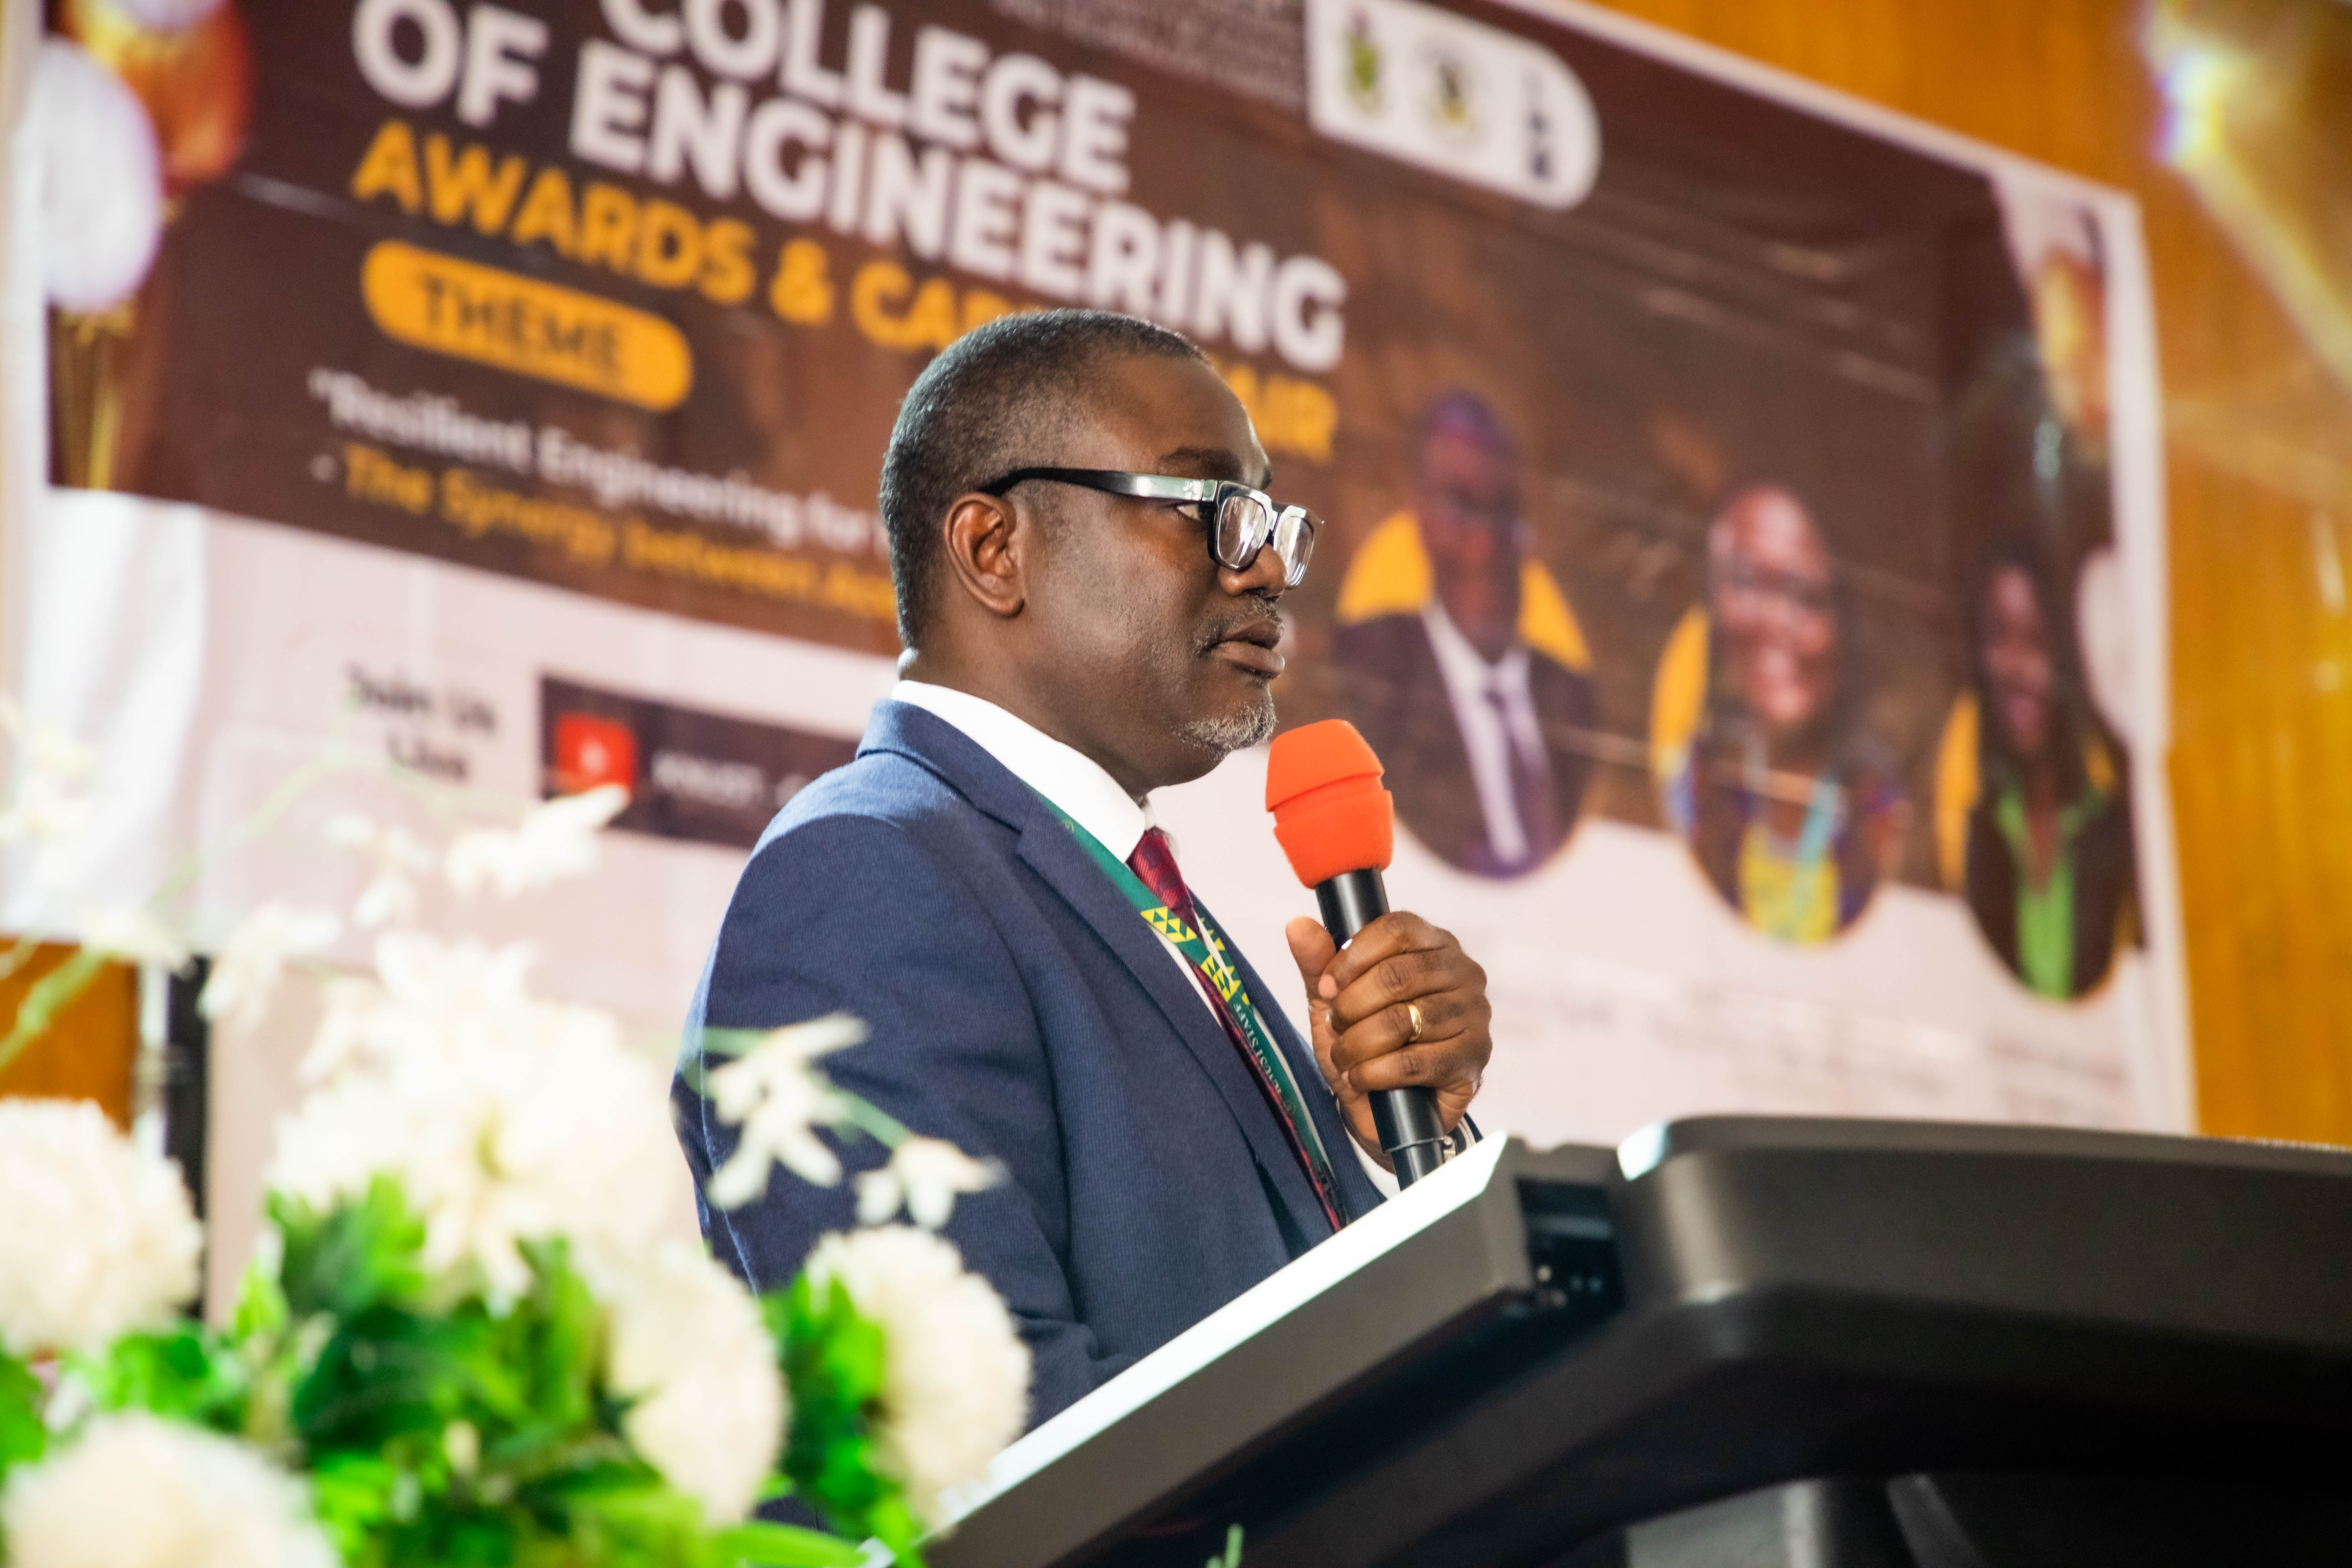 COME UP WITH ADAPTABLE AND SUSTAINABLE ENGINEERING SOLUTIONS - THE PROVOST OF THE COLLEGE OF ENGINEERING URGES STUDENTS.